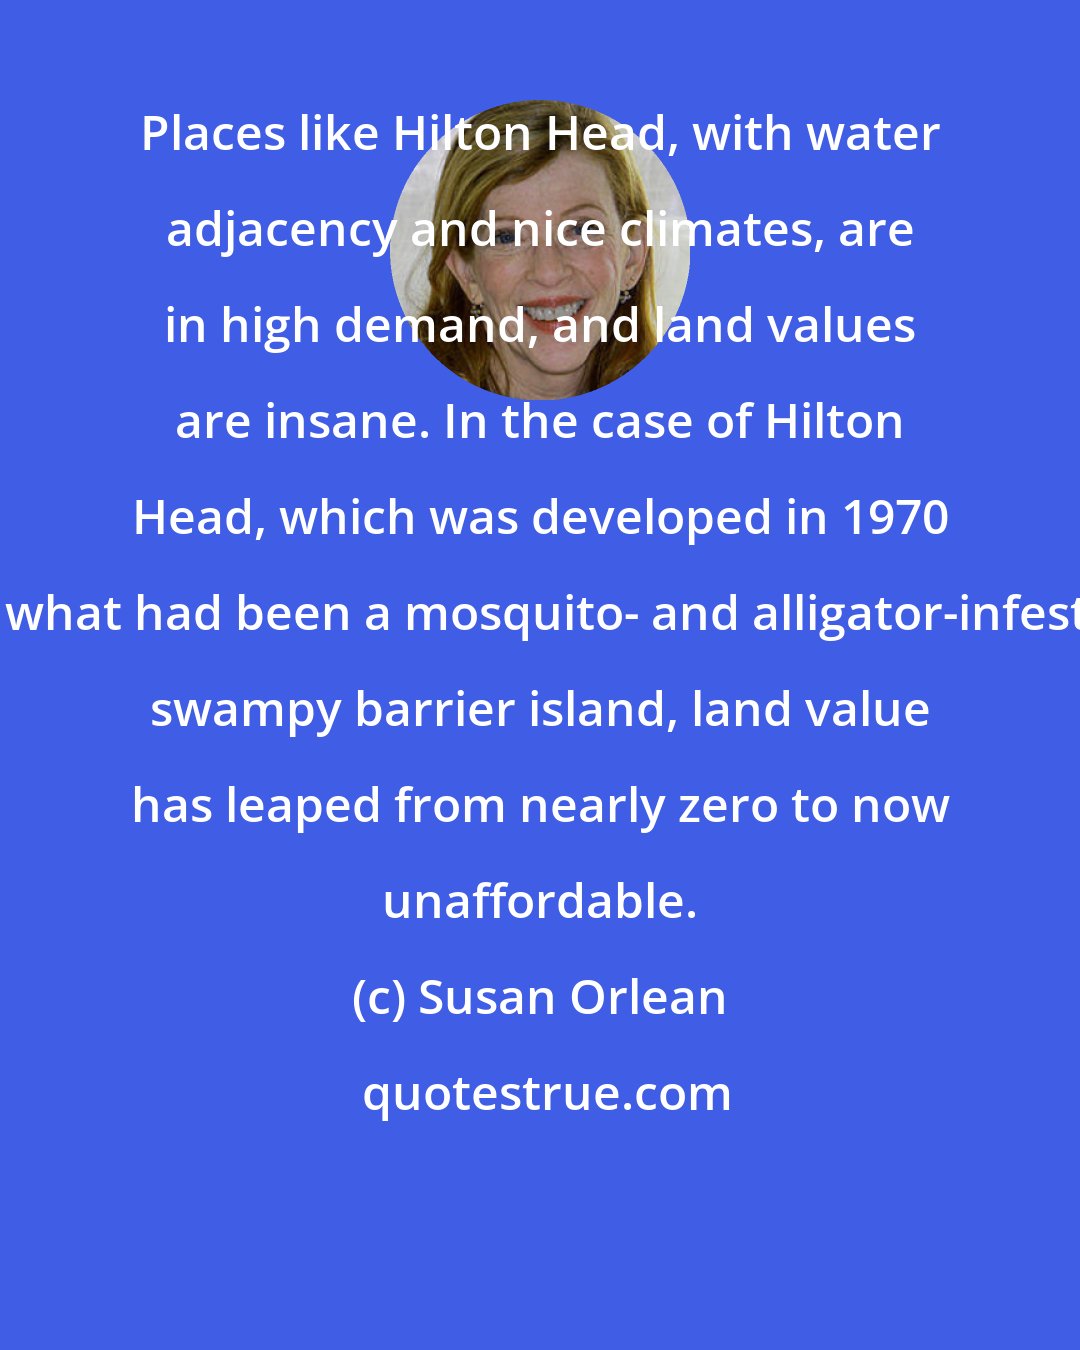 Susan Orlean: Places like Hilton Head, with water adjacency and nice climates, are in high demand, and land values are insane. In the case of Hilton Head, which was developed in 1970 on what had been a mosquito- and alligator-infested swampy barrier island, land value has leaped from nearly zero to now unaffordable.